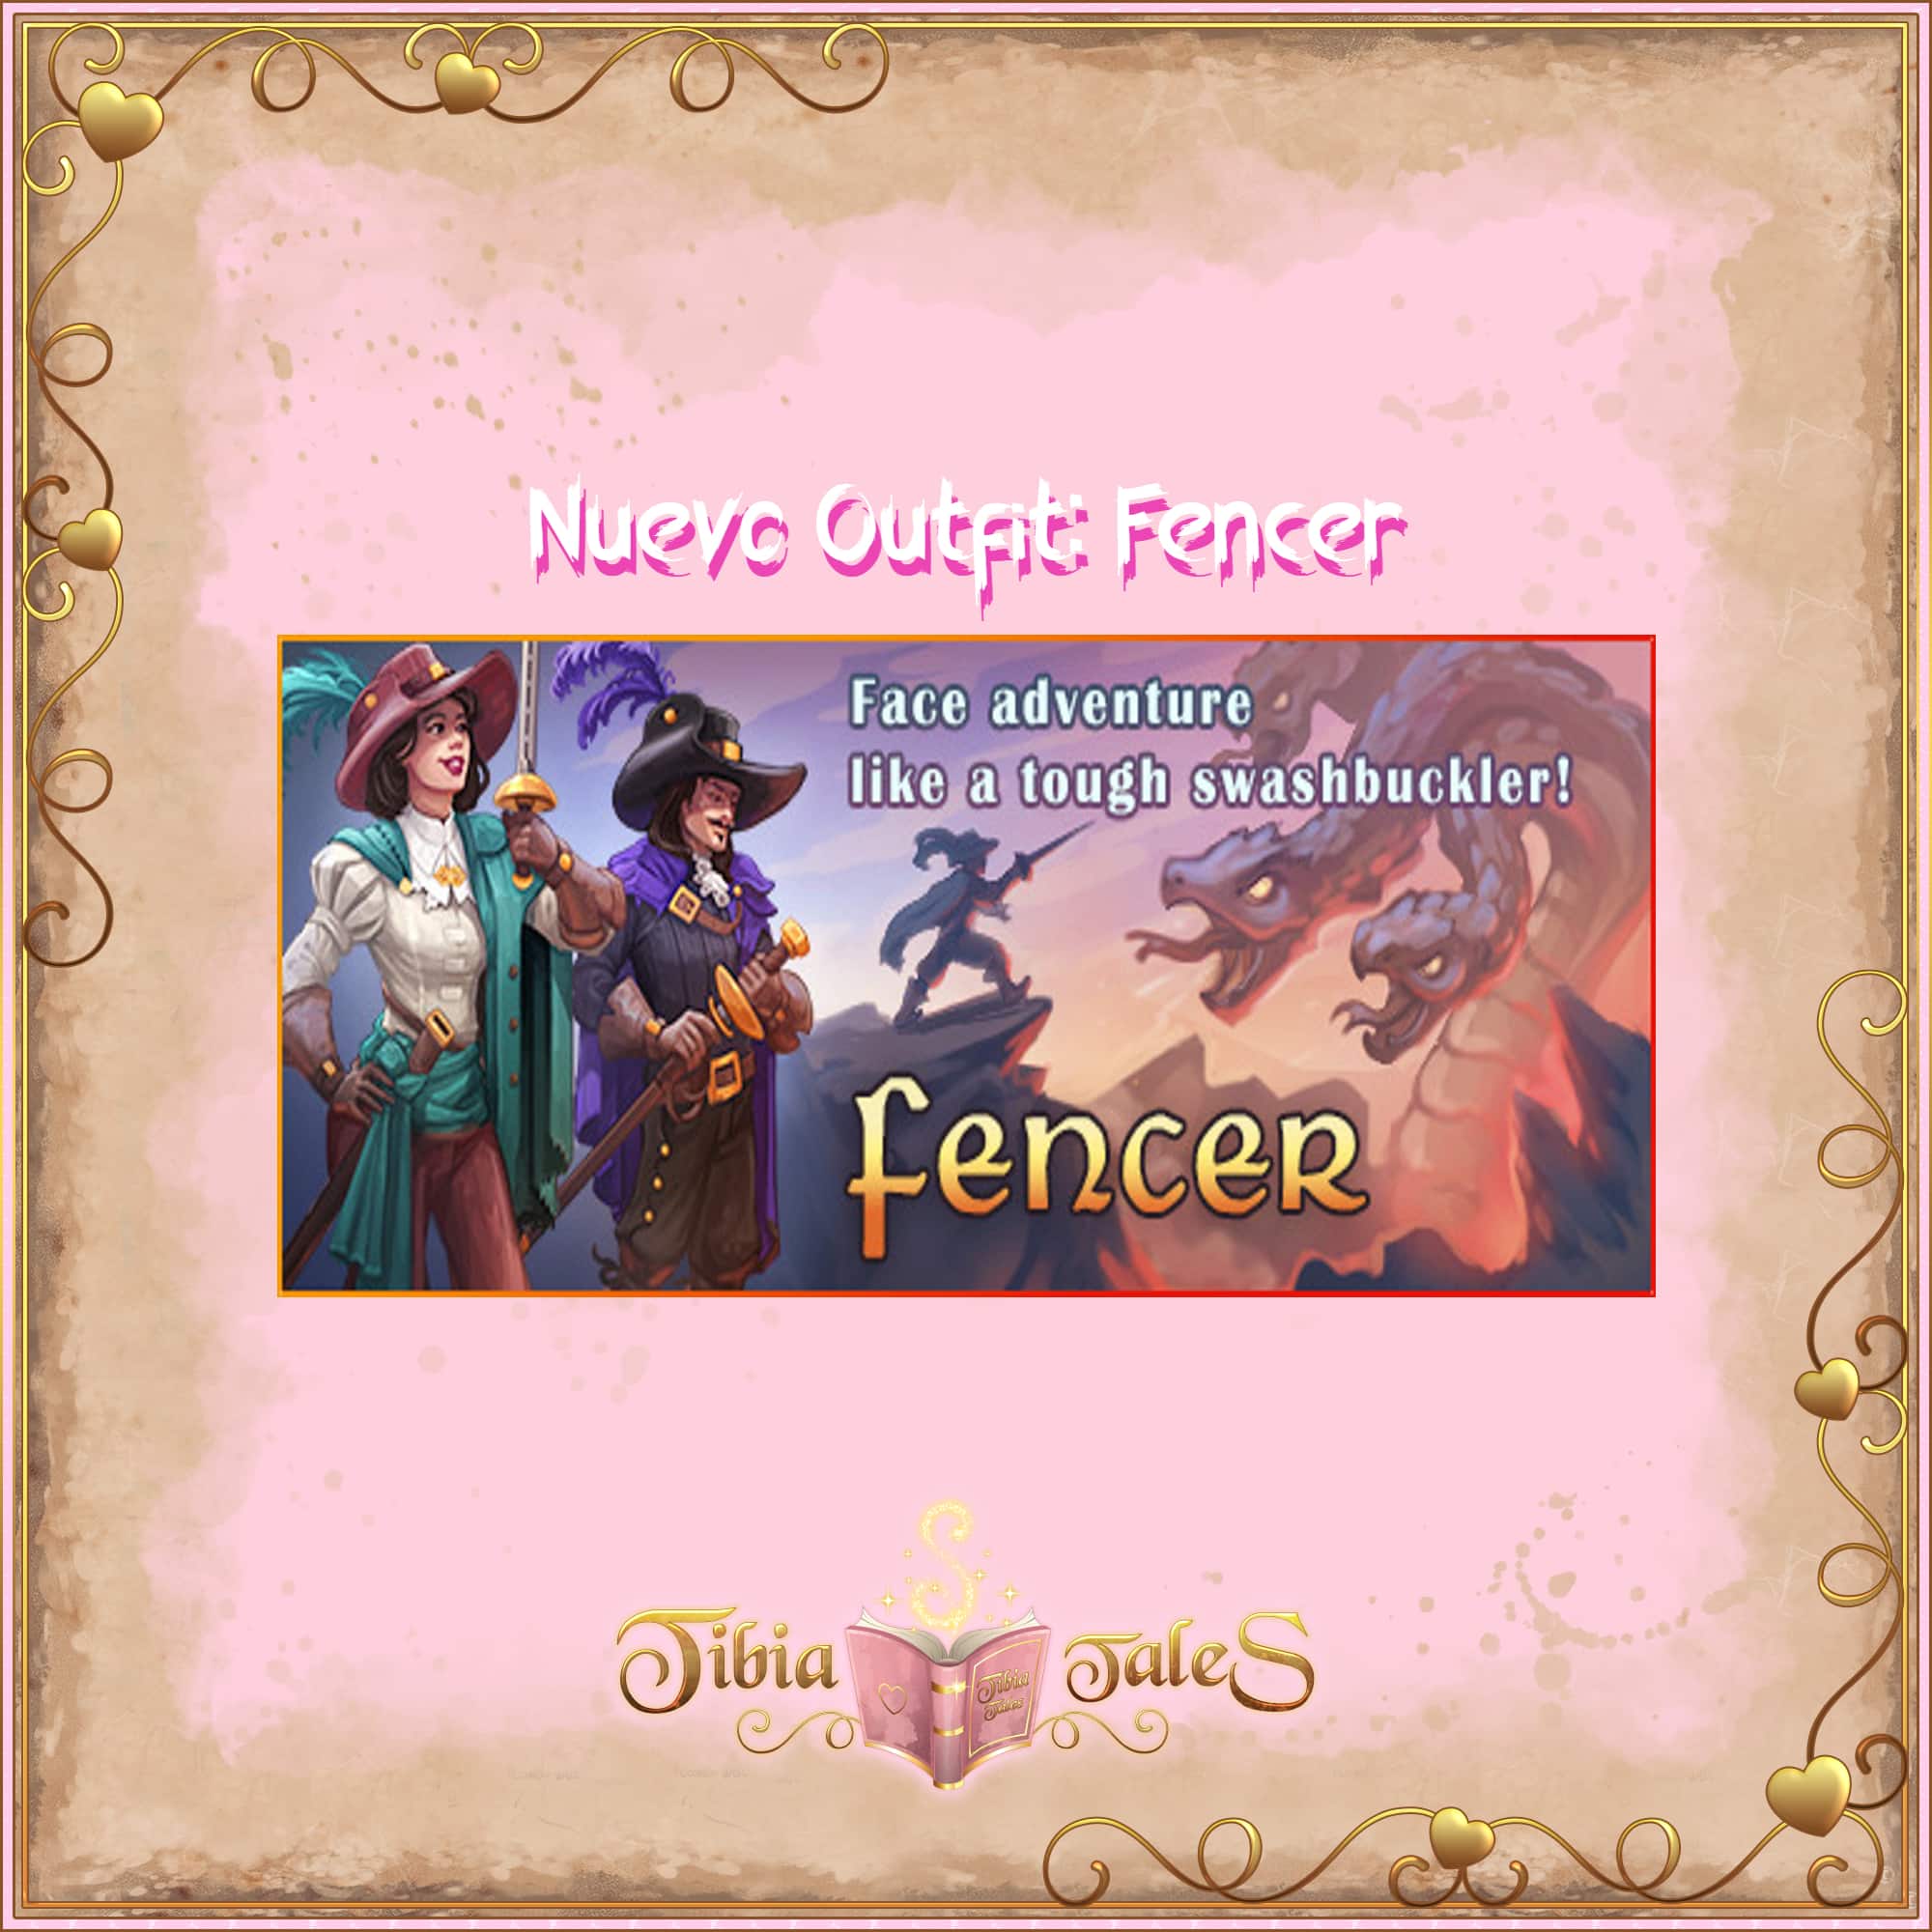 Nuevo outfit: Fencer